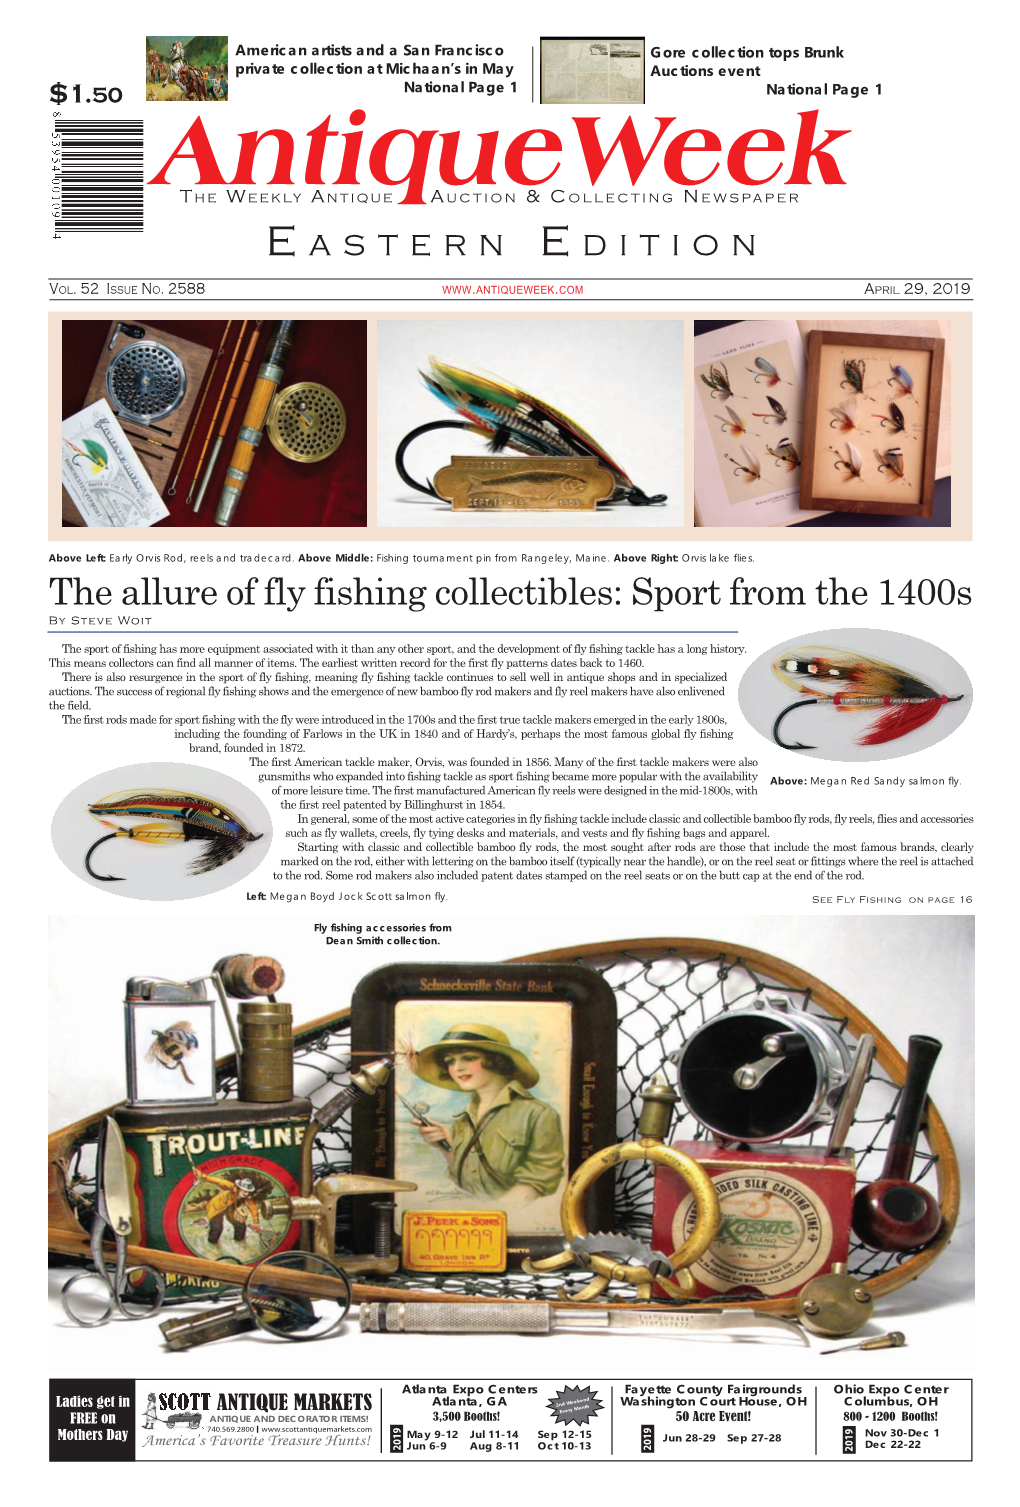 The Allure of Fly Fishing Collectibles: Sport from the 1400S by Steve Woit